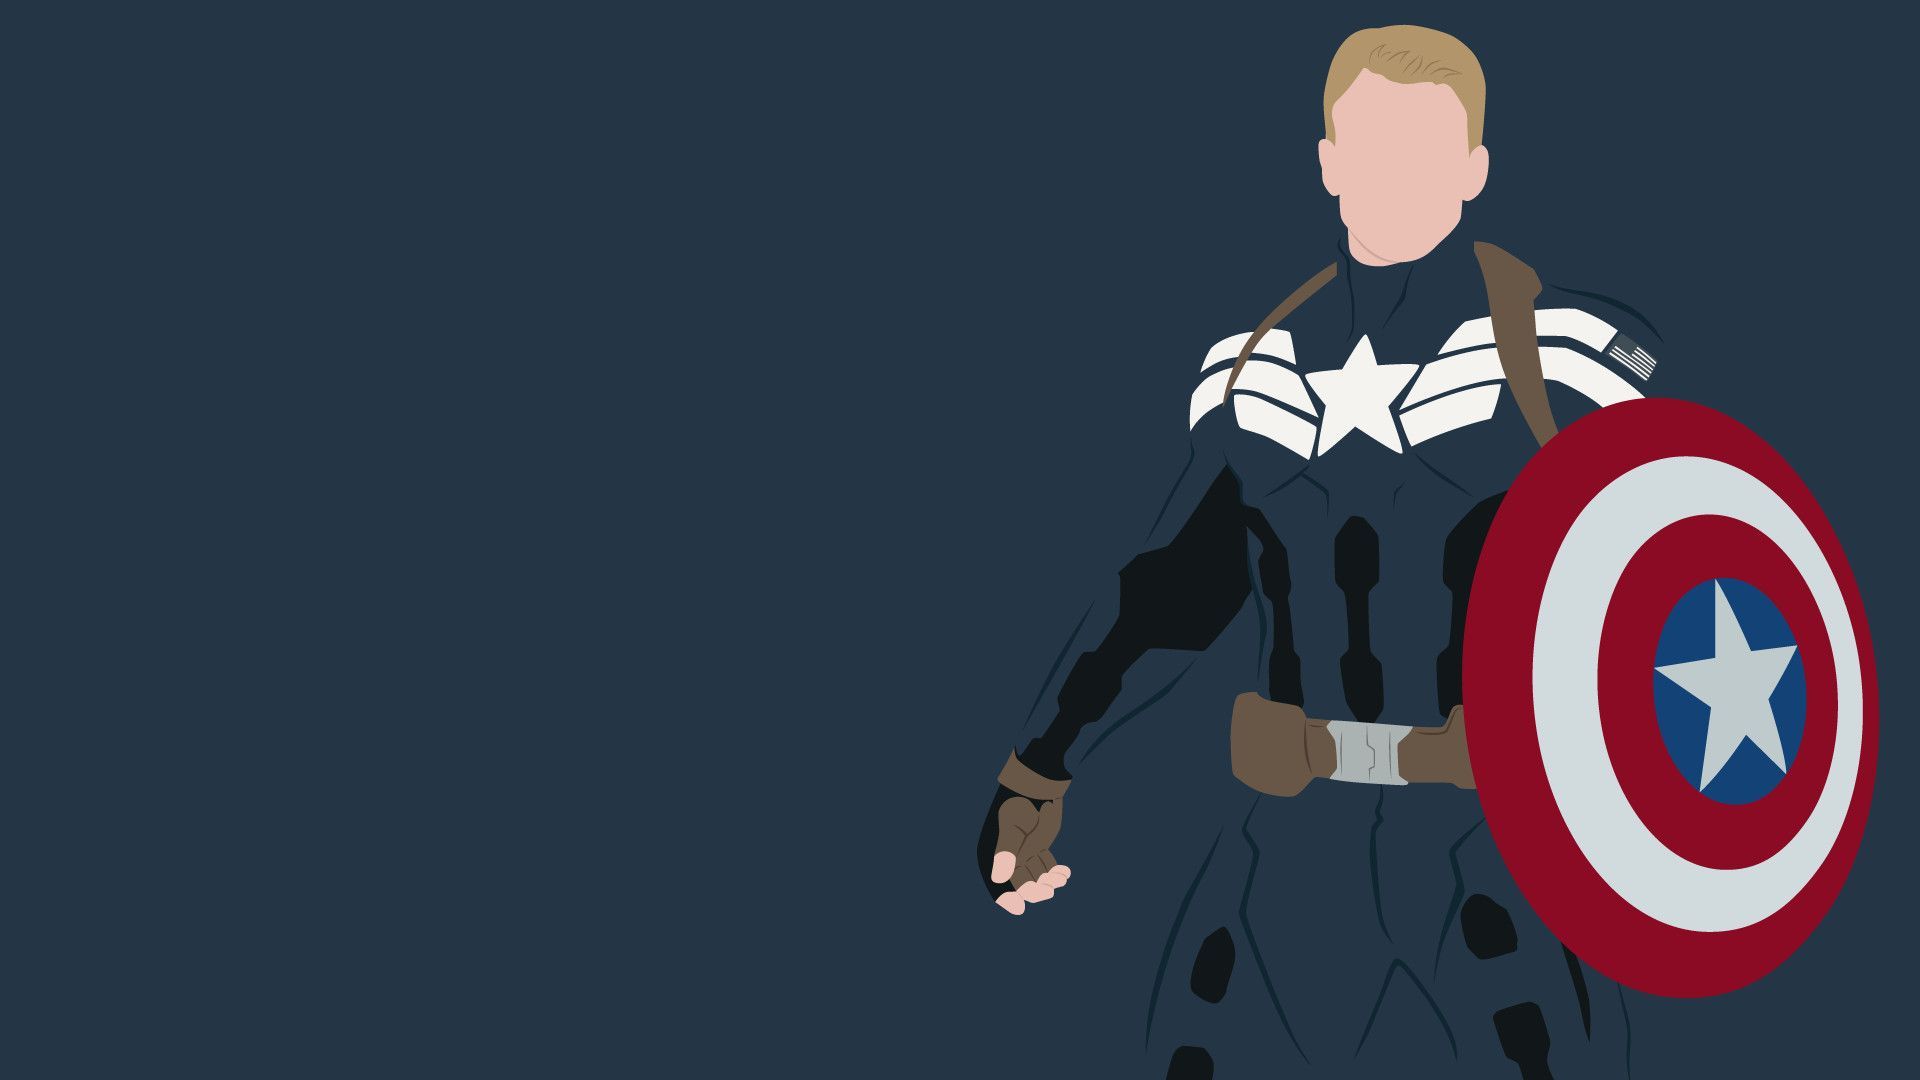 Captain America holding his shield in front of a blue background - Avengers, Marvel